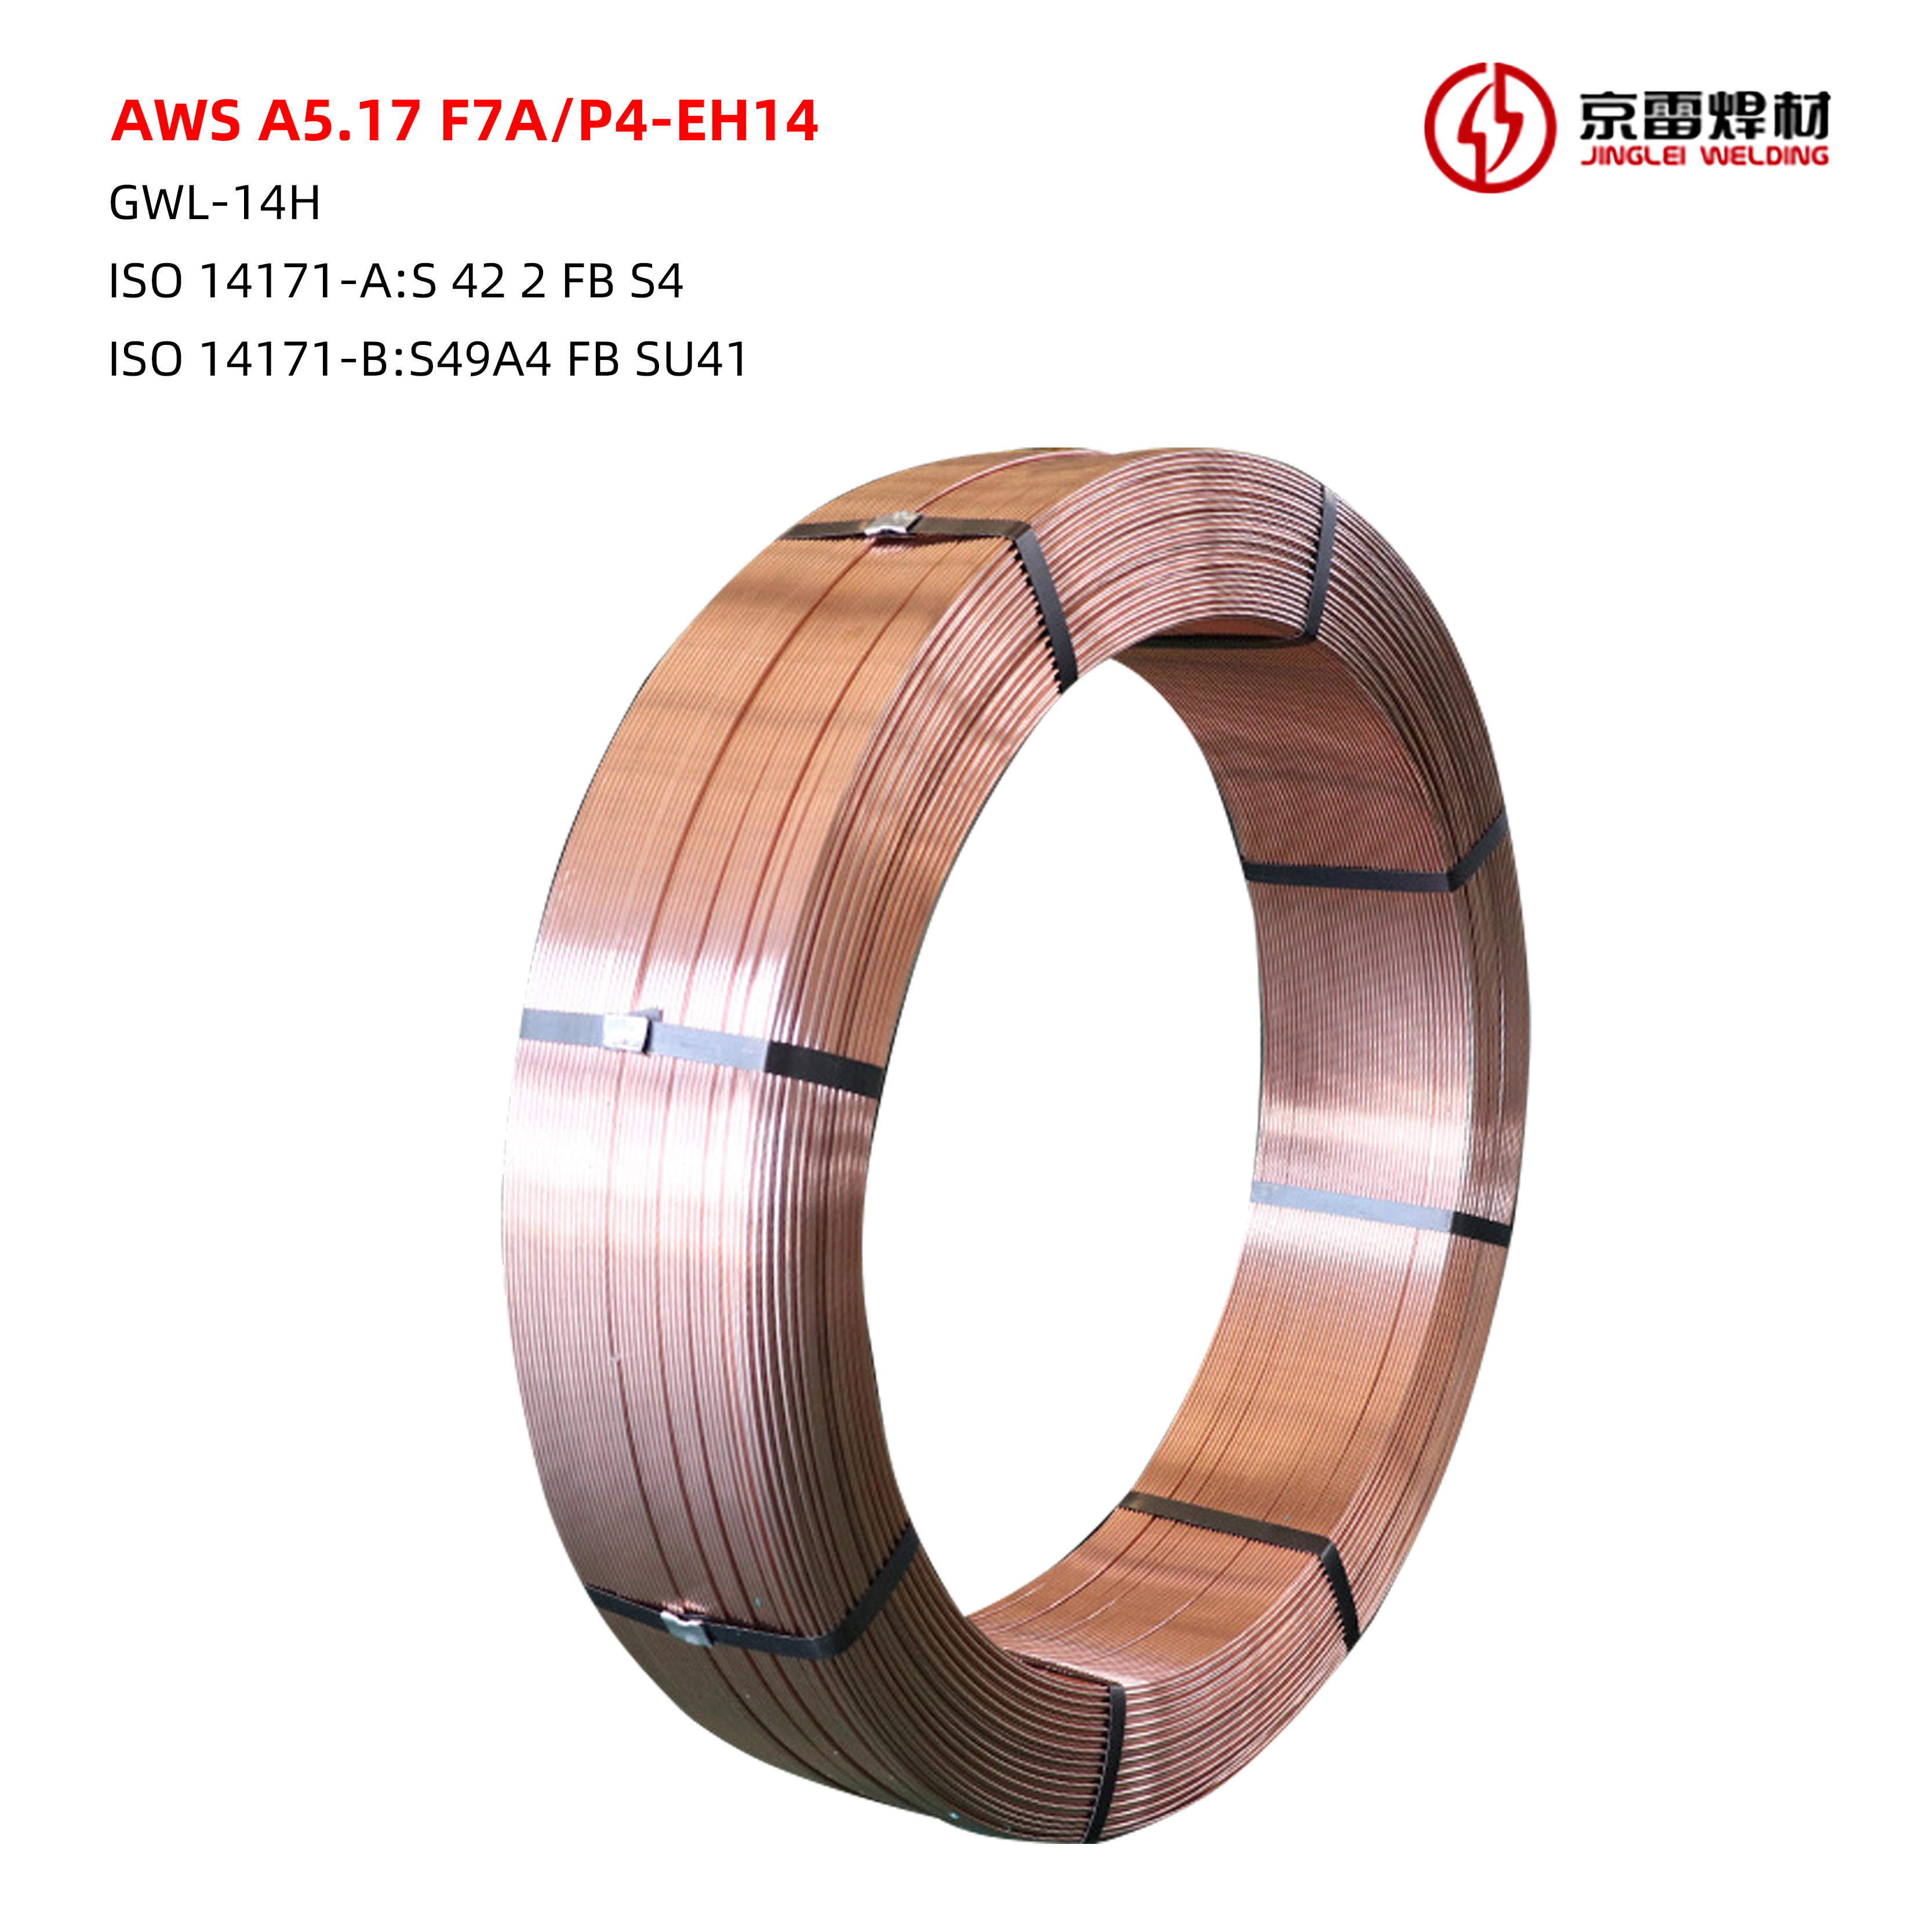 High Carbon steels SAW welding wire F7A/P4-EH14 and welding flux weld fabrication stuff